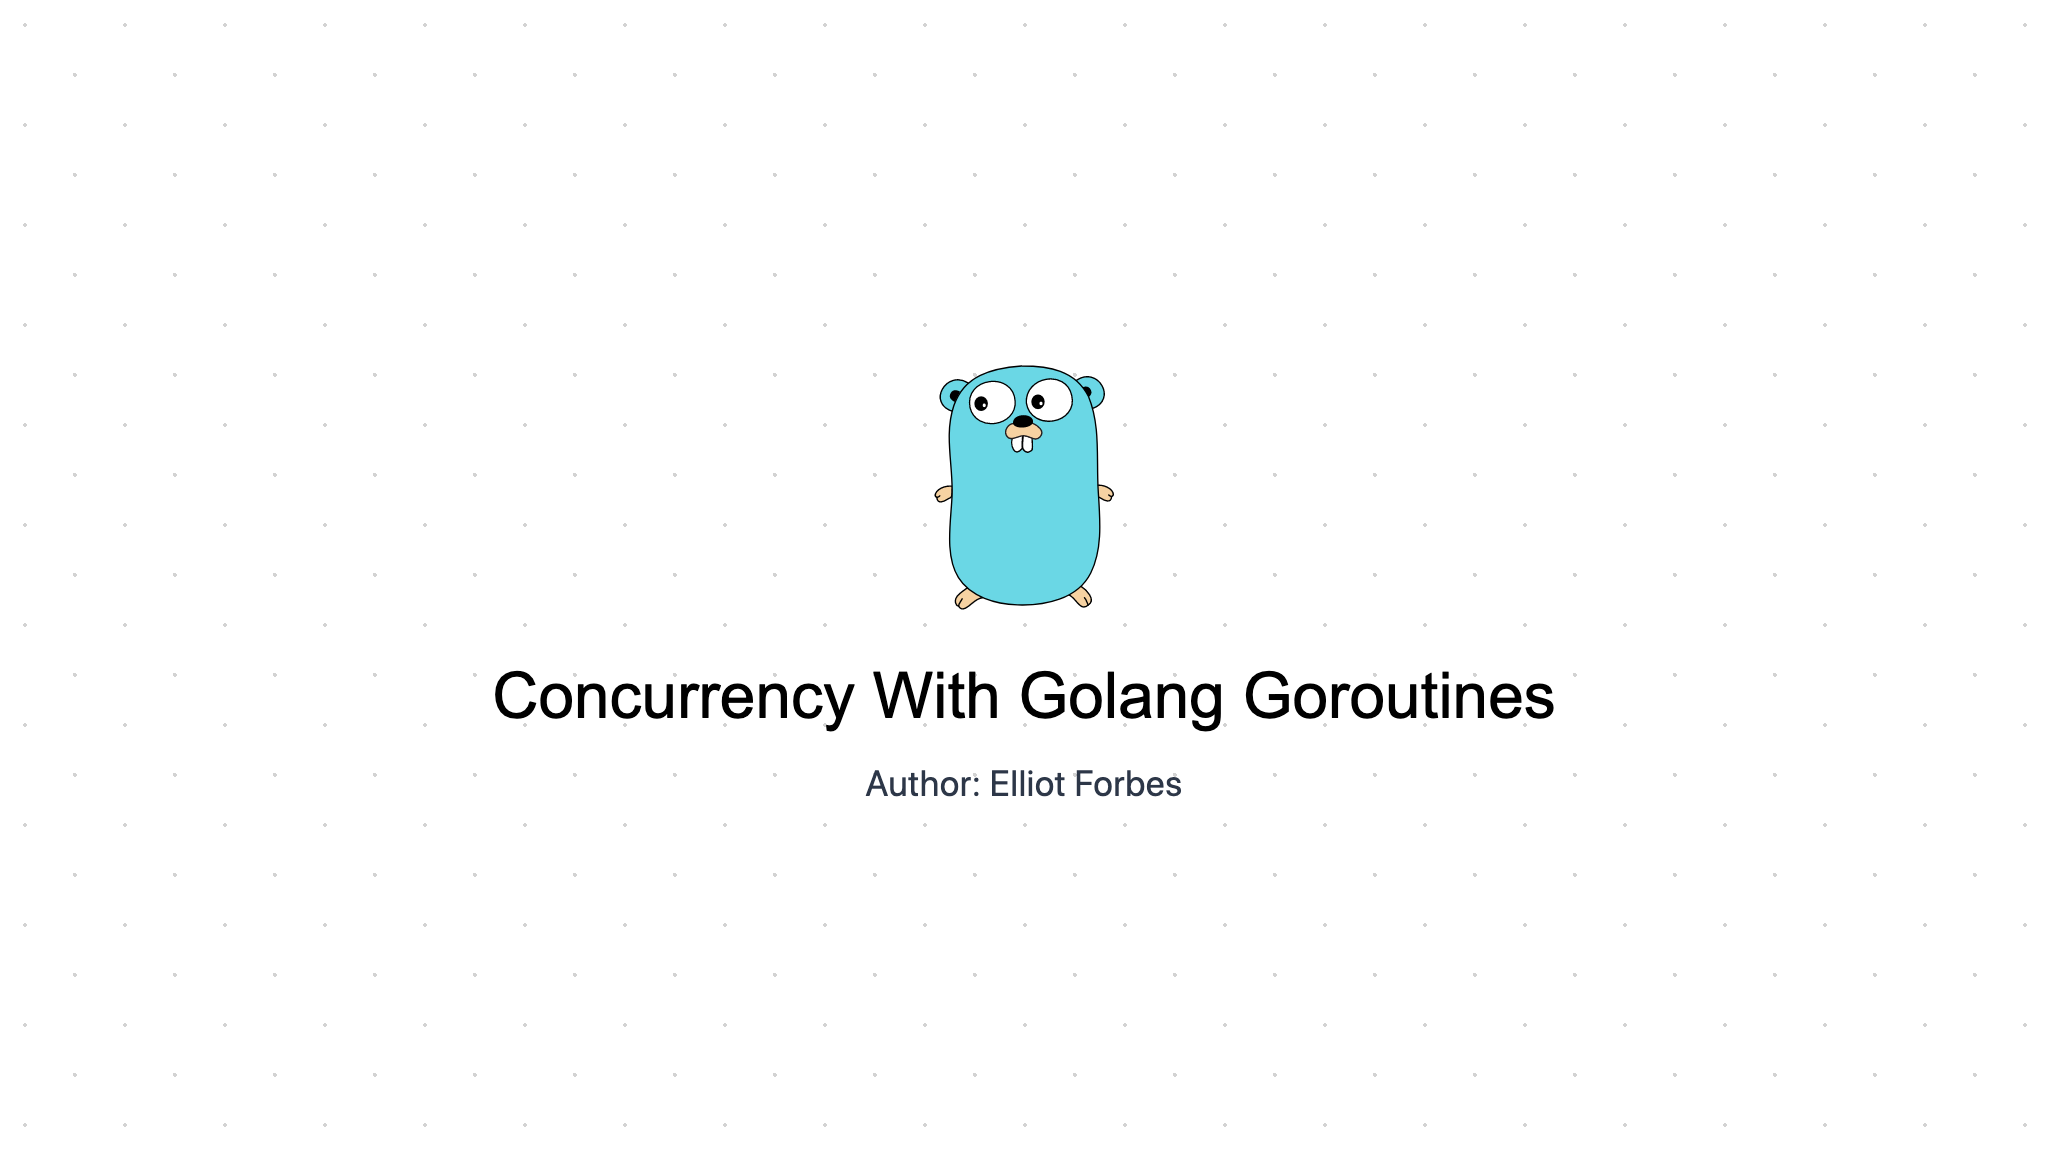 parsing json files with golang tutorialedge net.